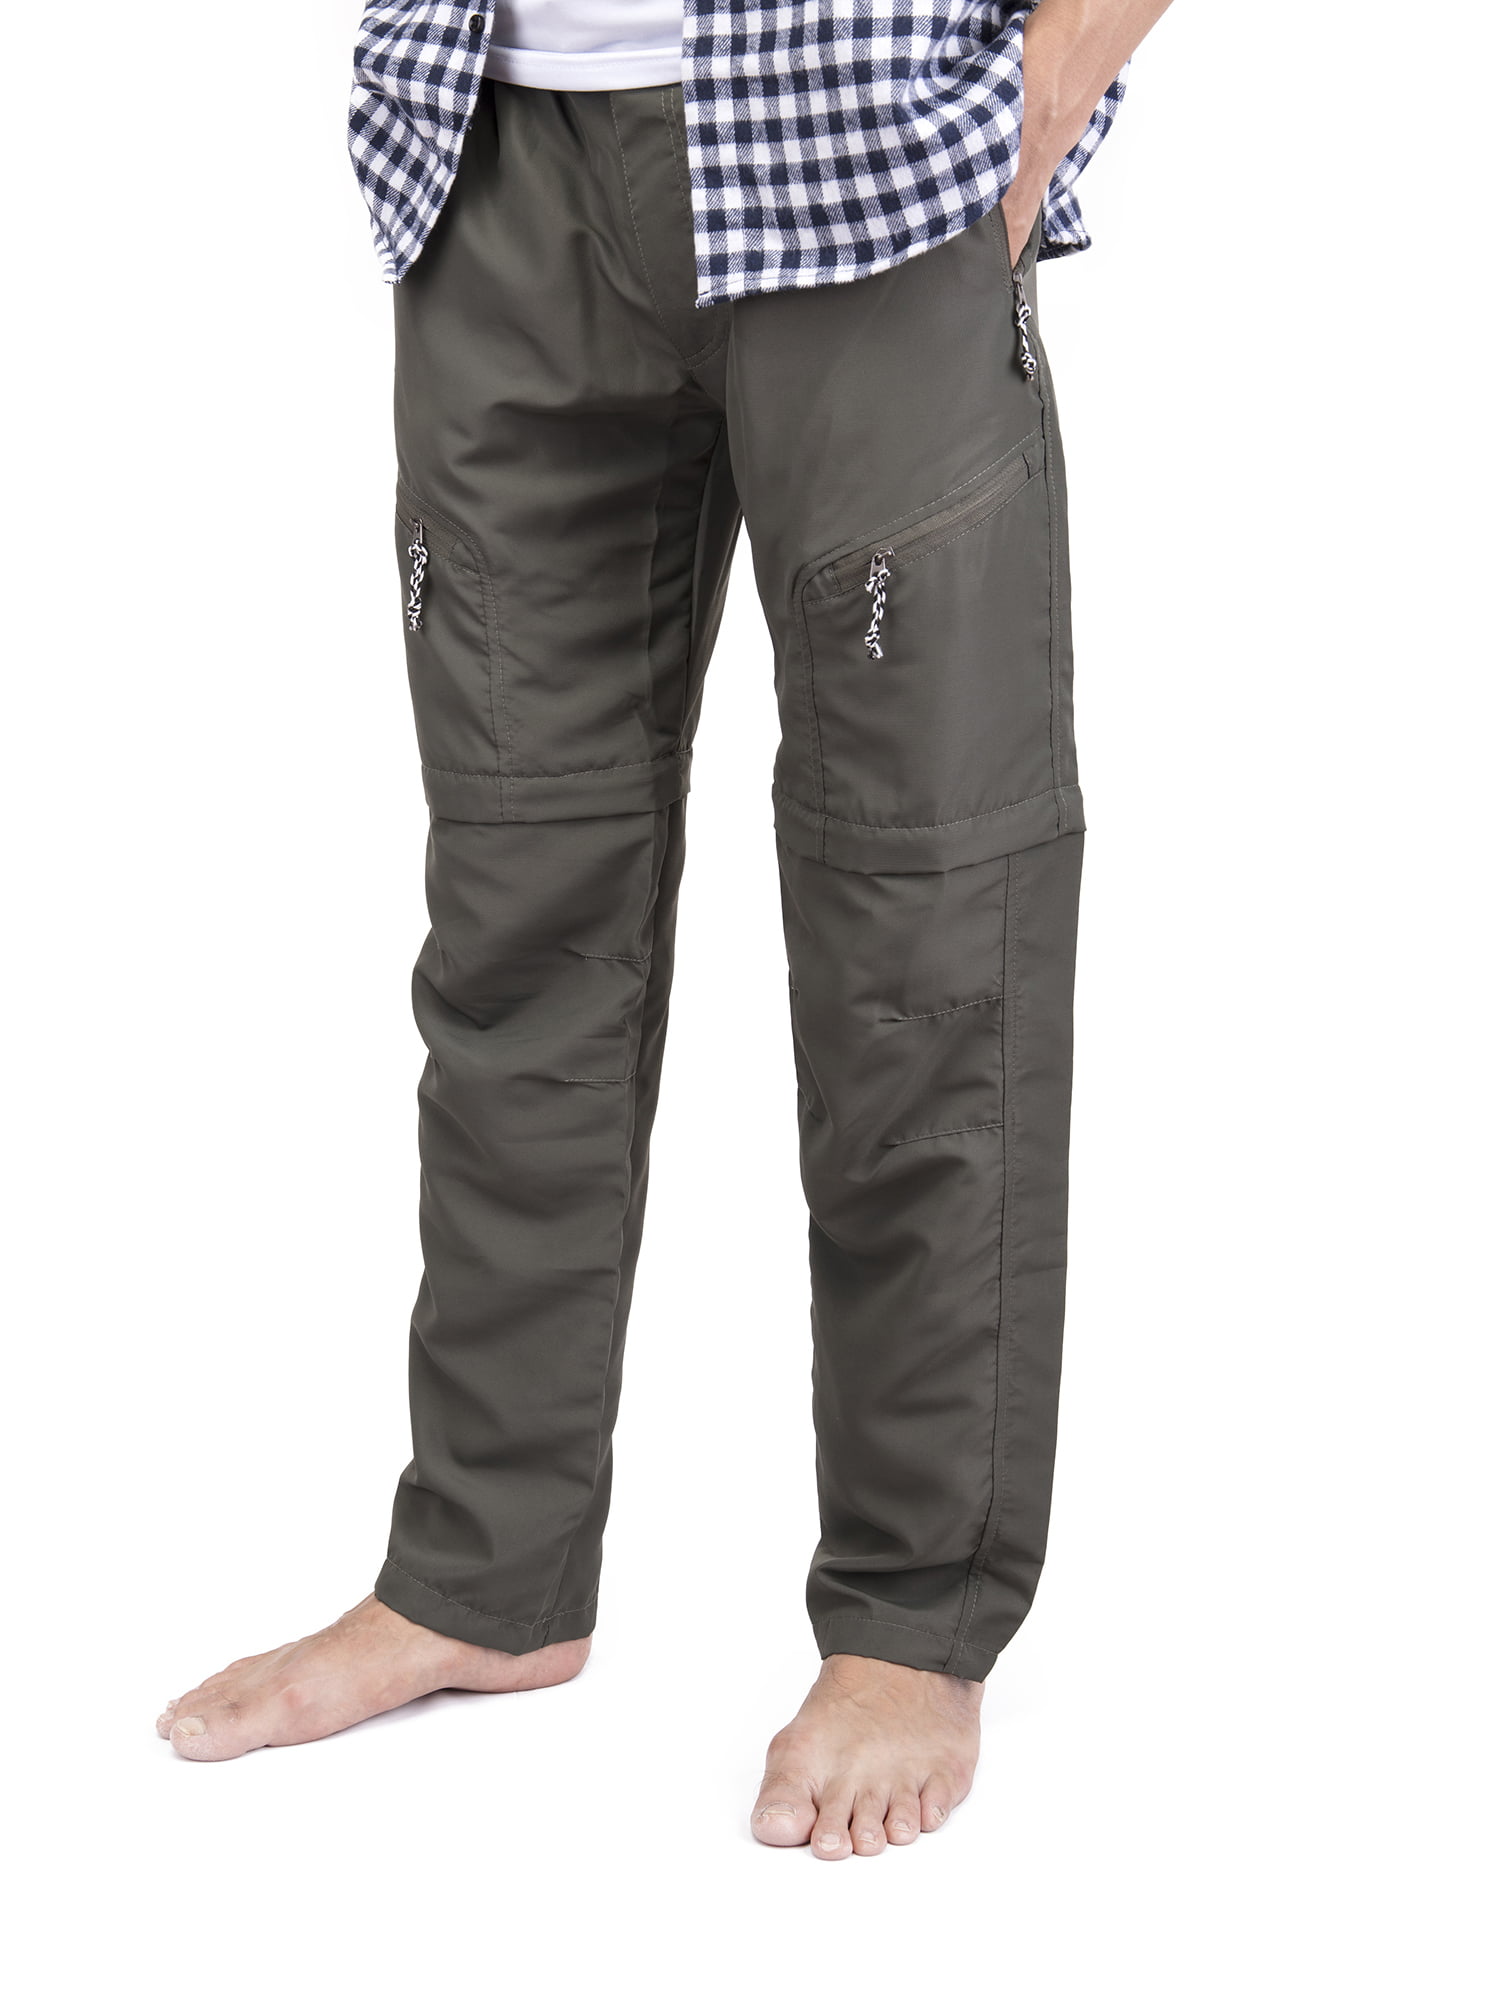 Mens Outdoor Anytime Quick Dry Convertible Lightweight Hiking Fishing Zip Off Cargo Work Pant